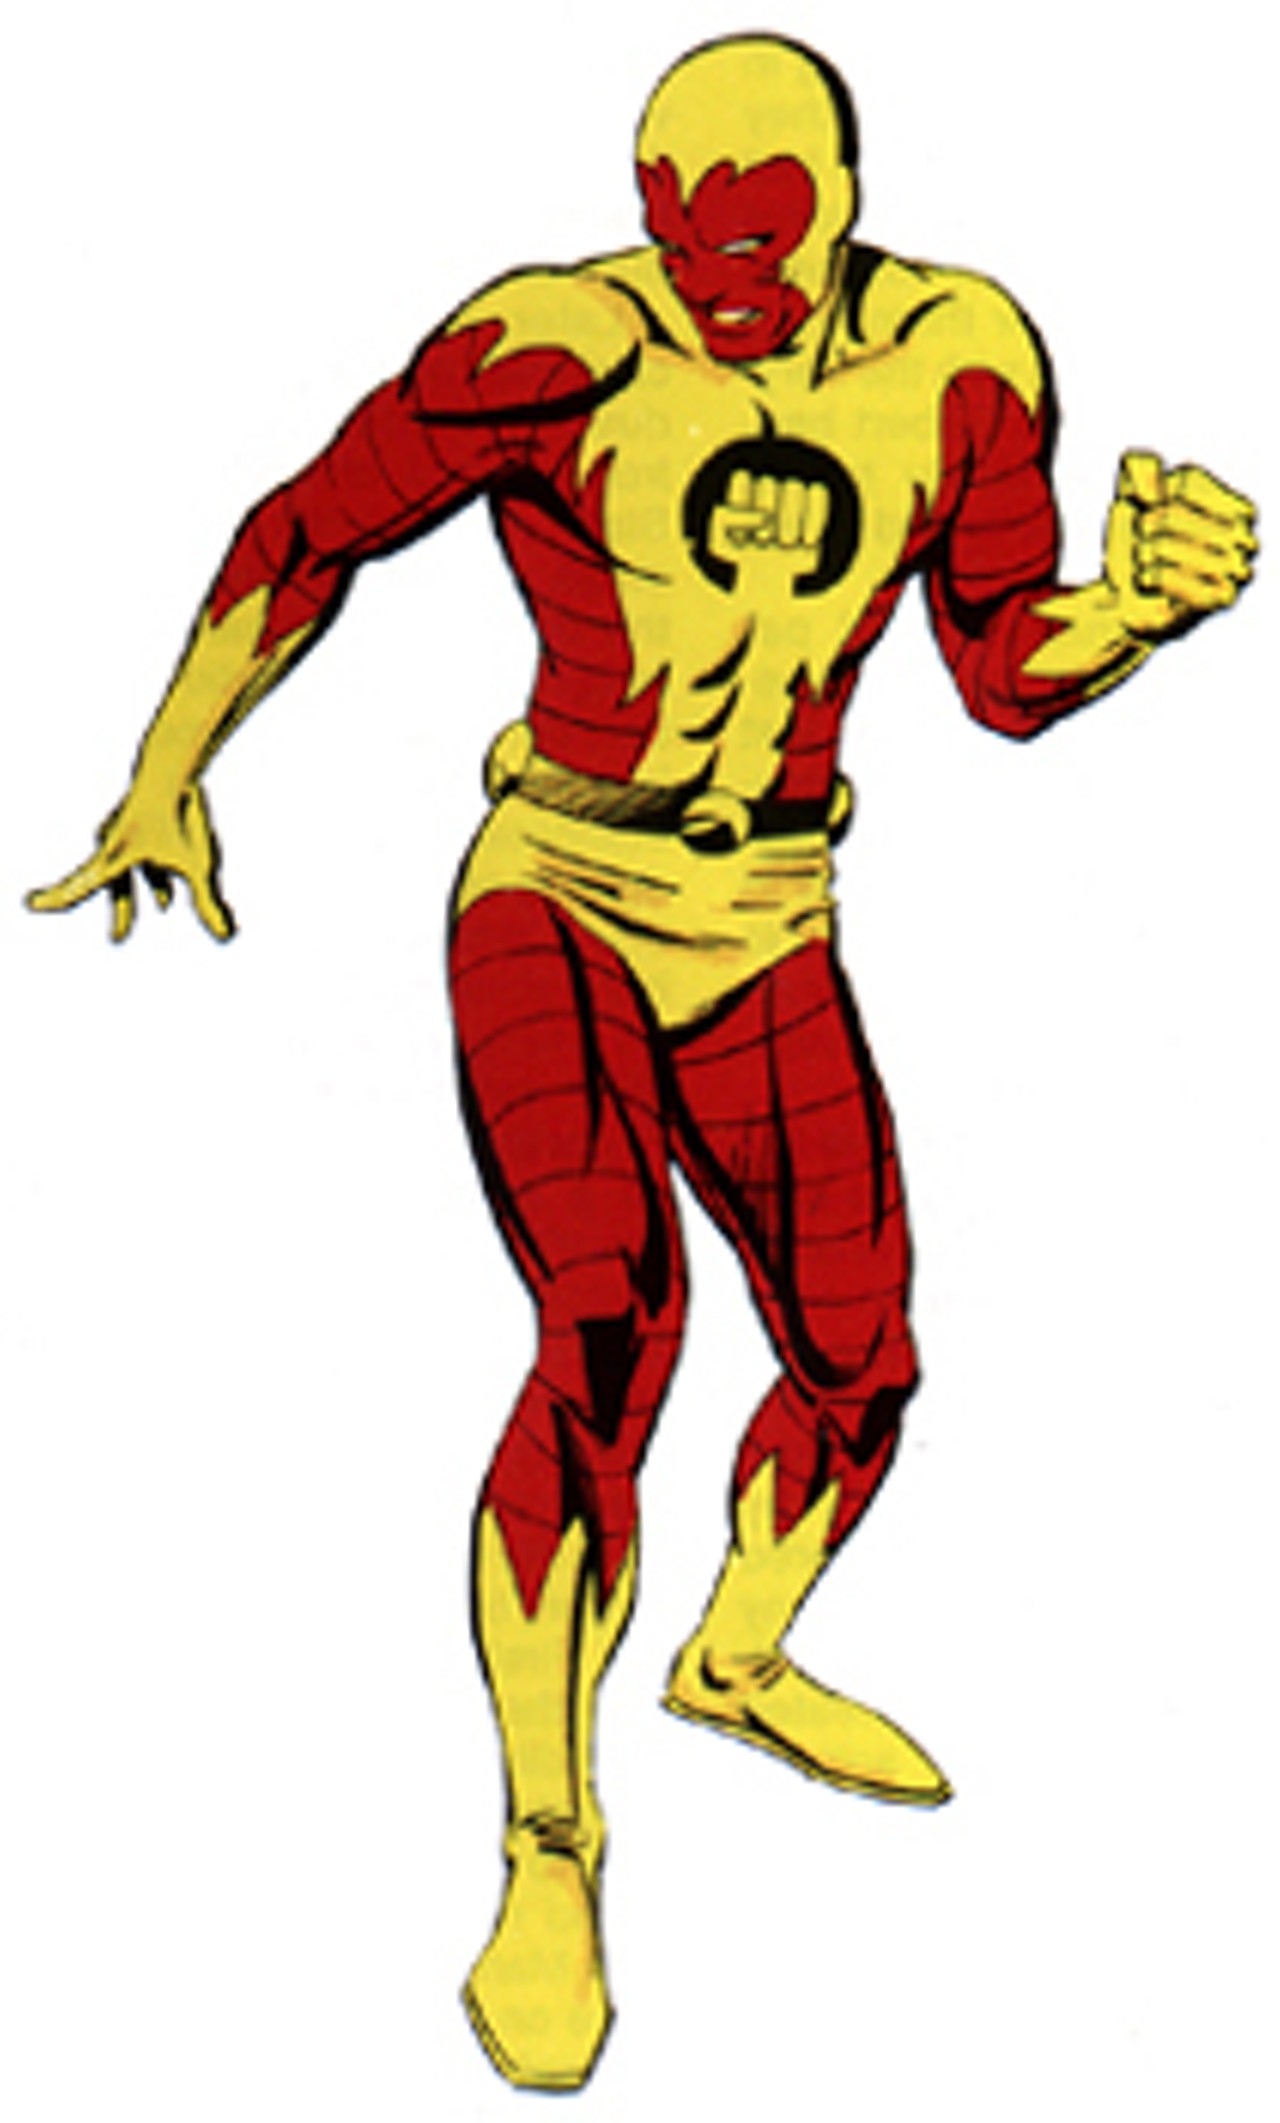 Firebrand
DC might have a Detroiter called Firestorm, but Marvel has a Detroiter called Firebrand. Gary Gilbert was originally a campaigner for good, fighting the good fight, but alcoholism led him to change sides and become a “supervillain enforcer.” He has punched it out with the Punisher on a few occasions, and he always loses.